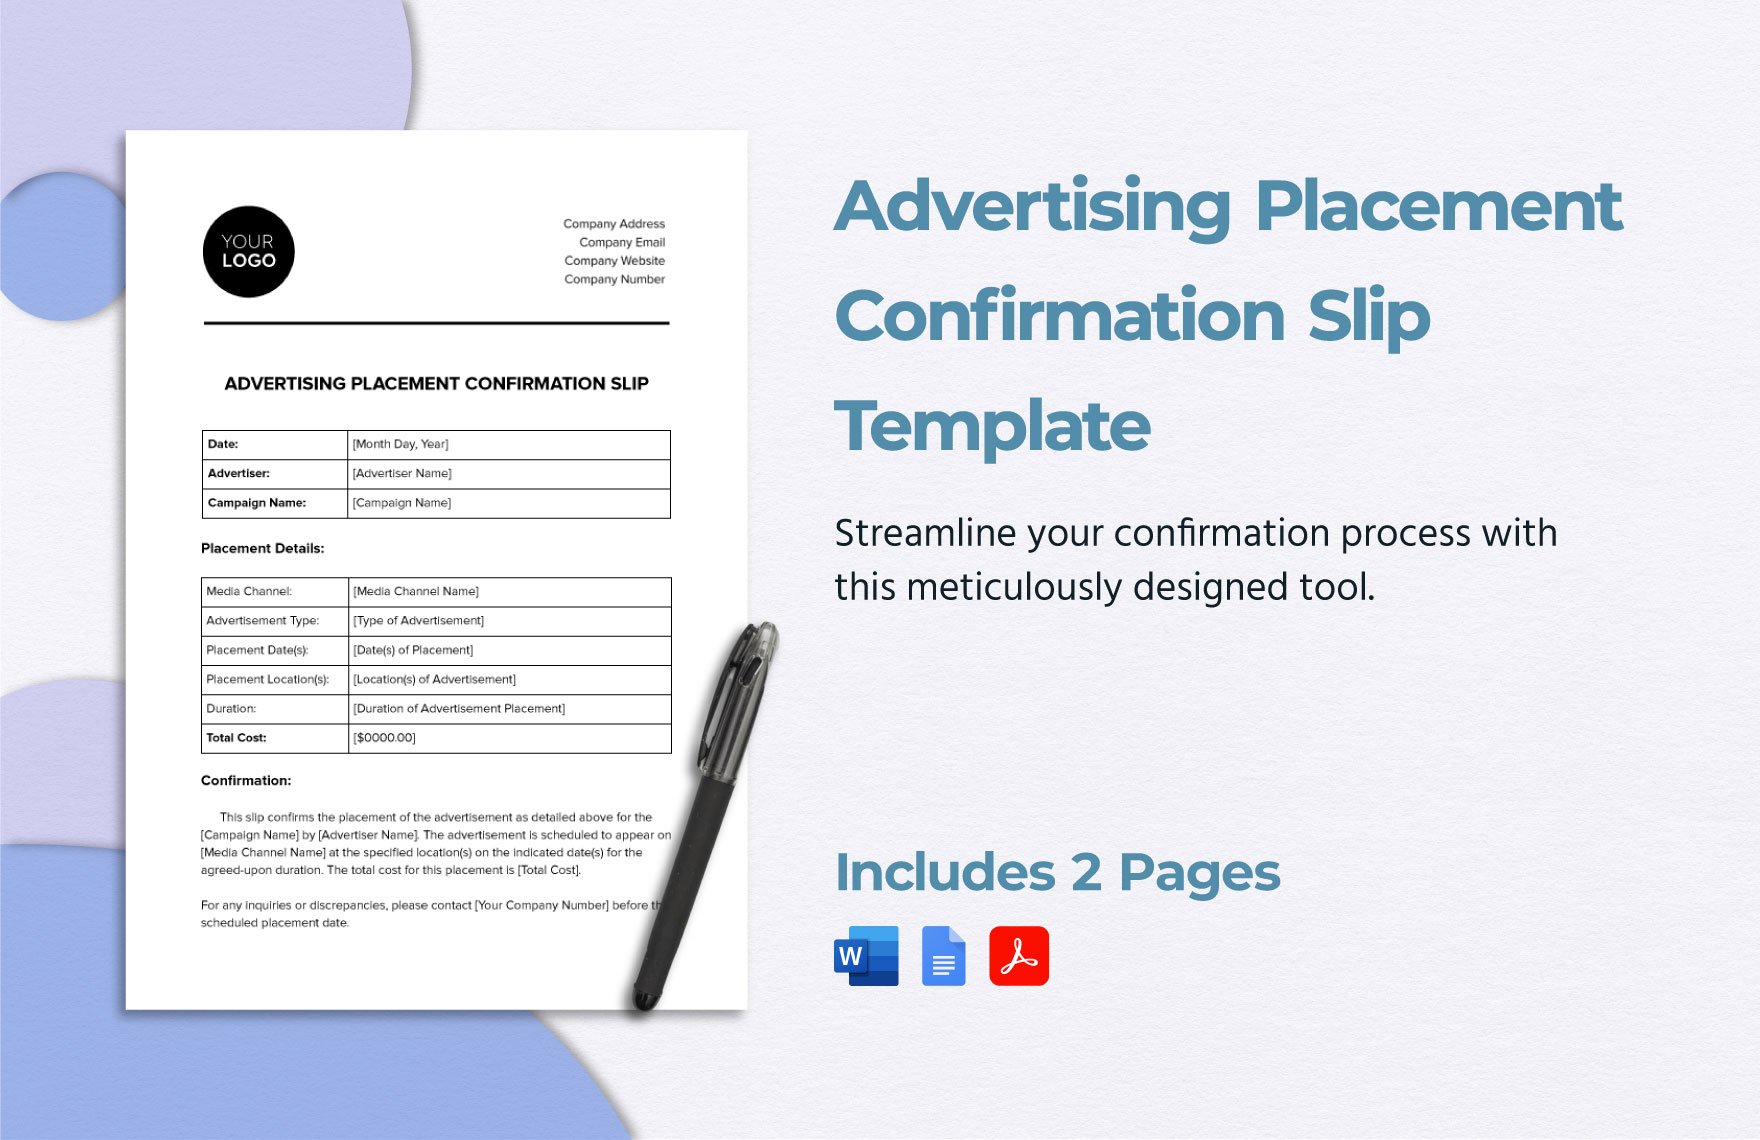 Advertising Placement Confirmation Slip Template in Word, Google Docs, PDF